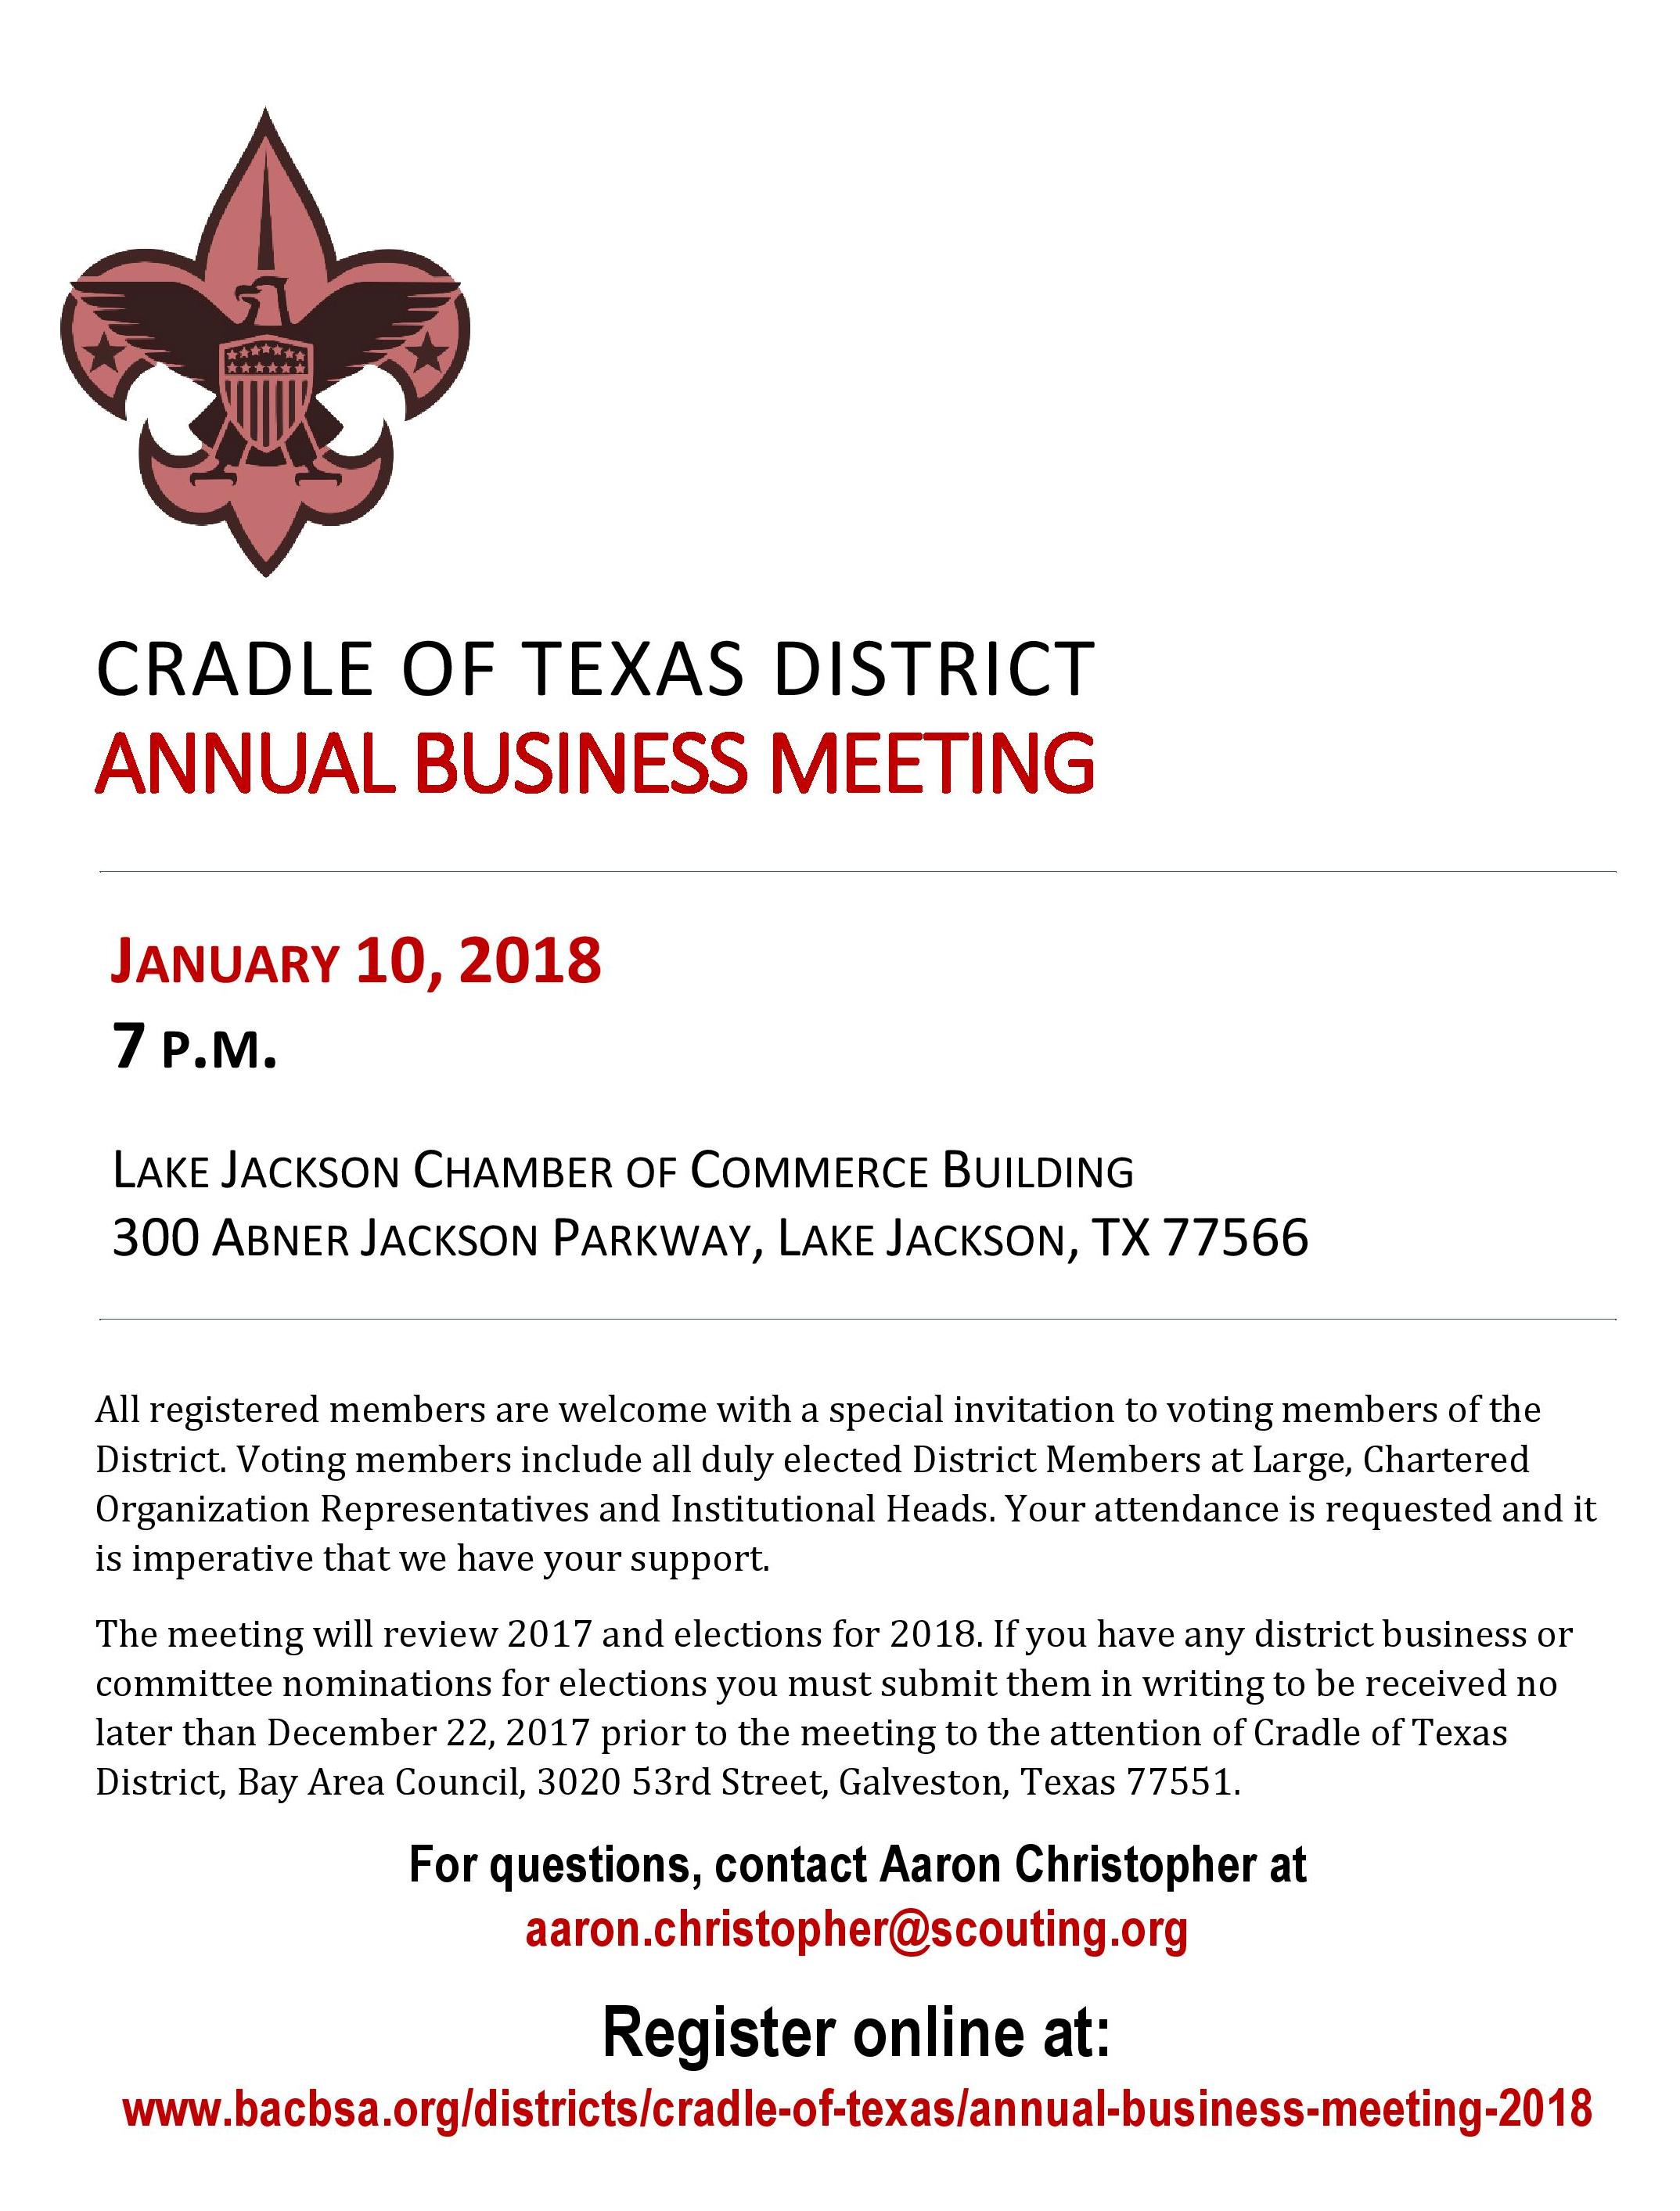 Cradle of Texas Annual Business Meeting